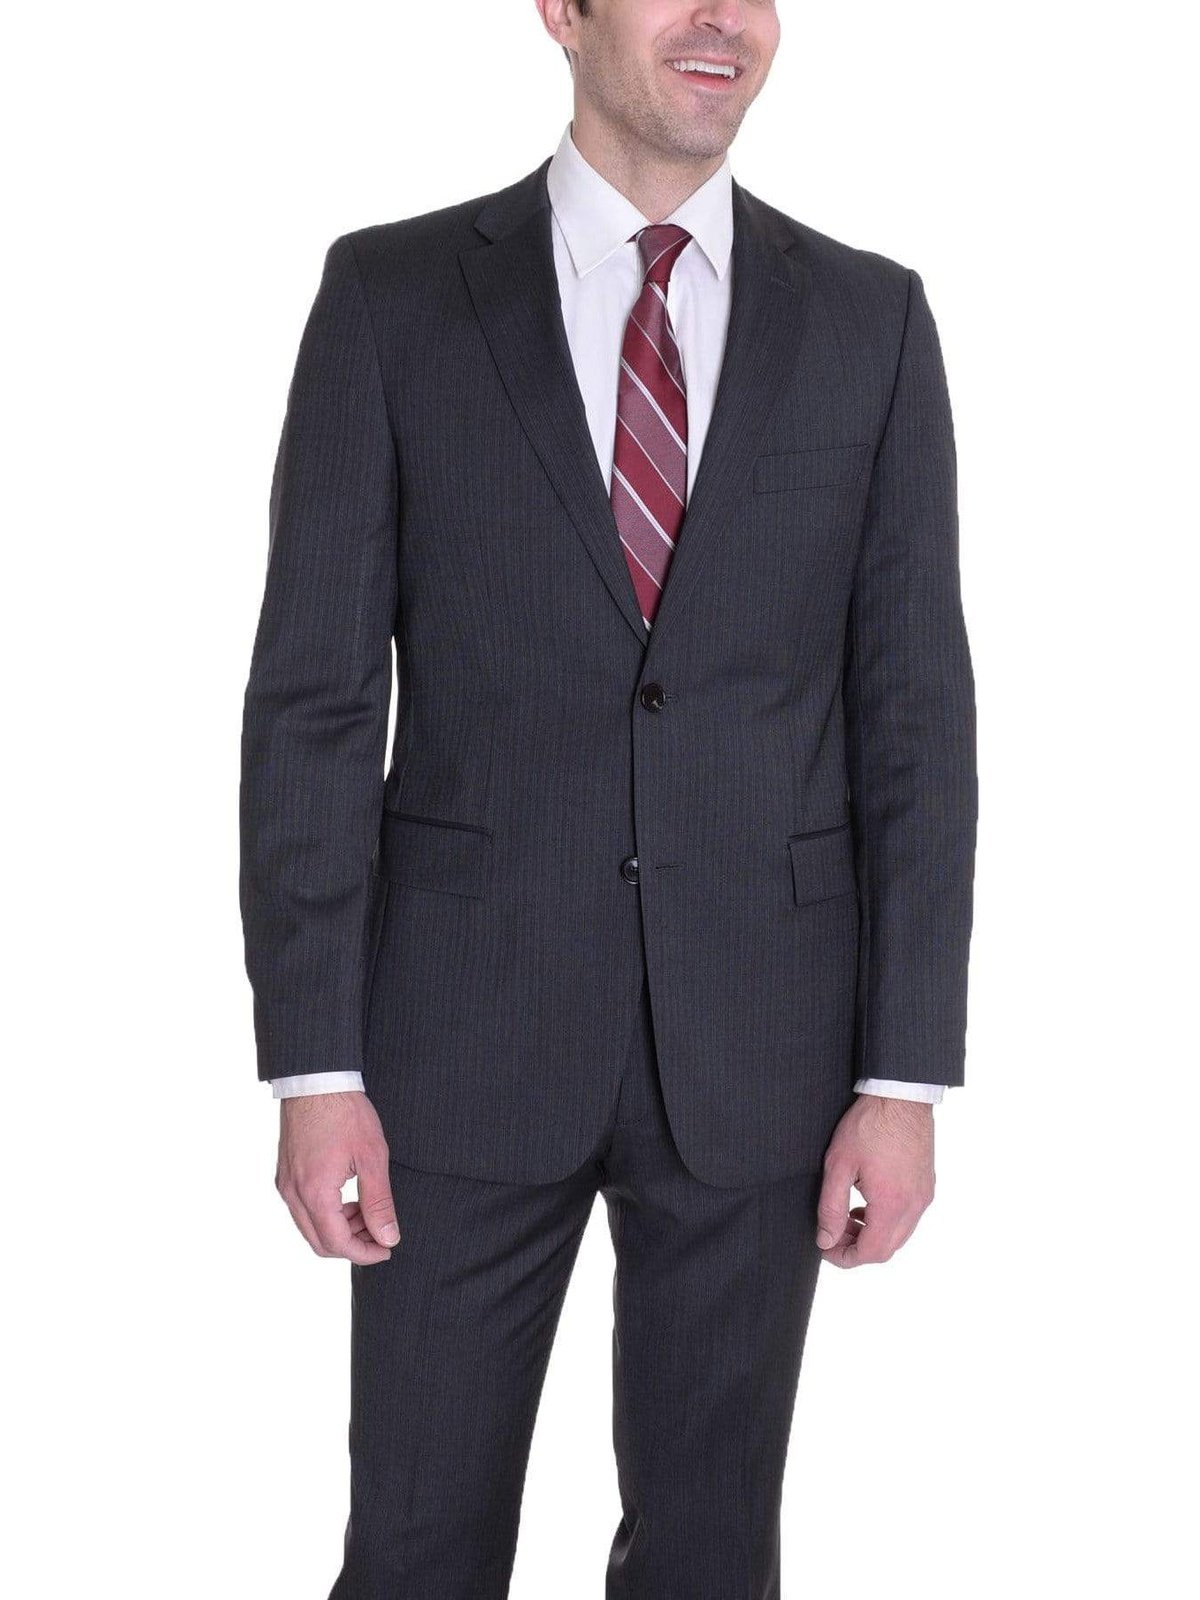 HUGO BOSS TWO PIECE SUITS Hugo Boss Pasini2/movie2 Classic Fit Charcoal Gray Striped Super 100 Wool Suit